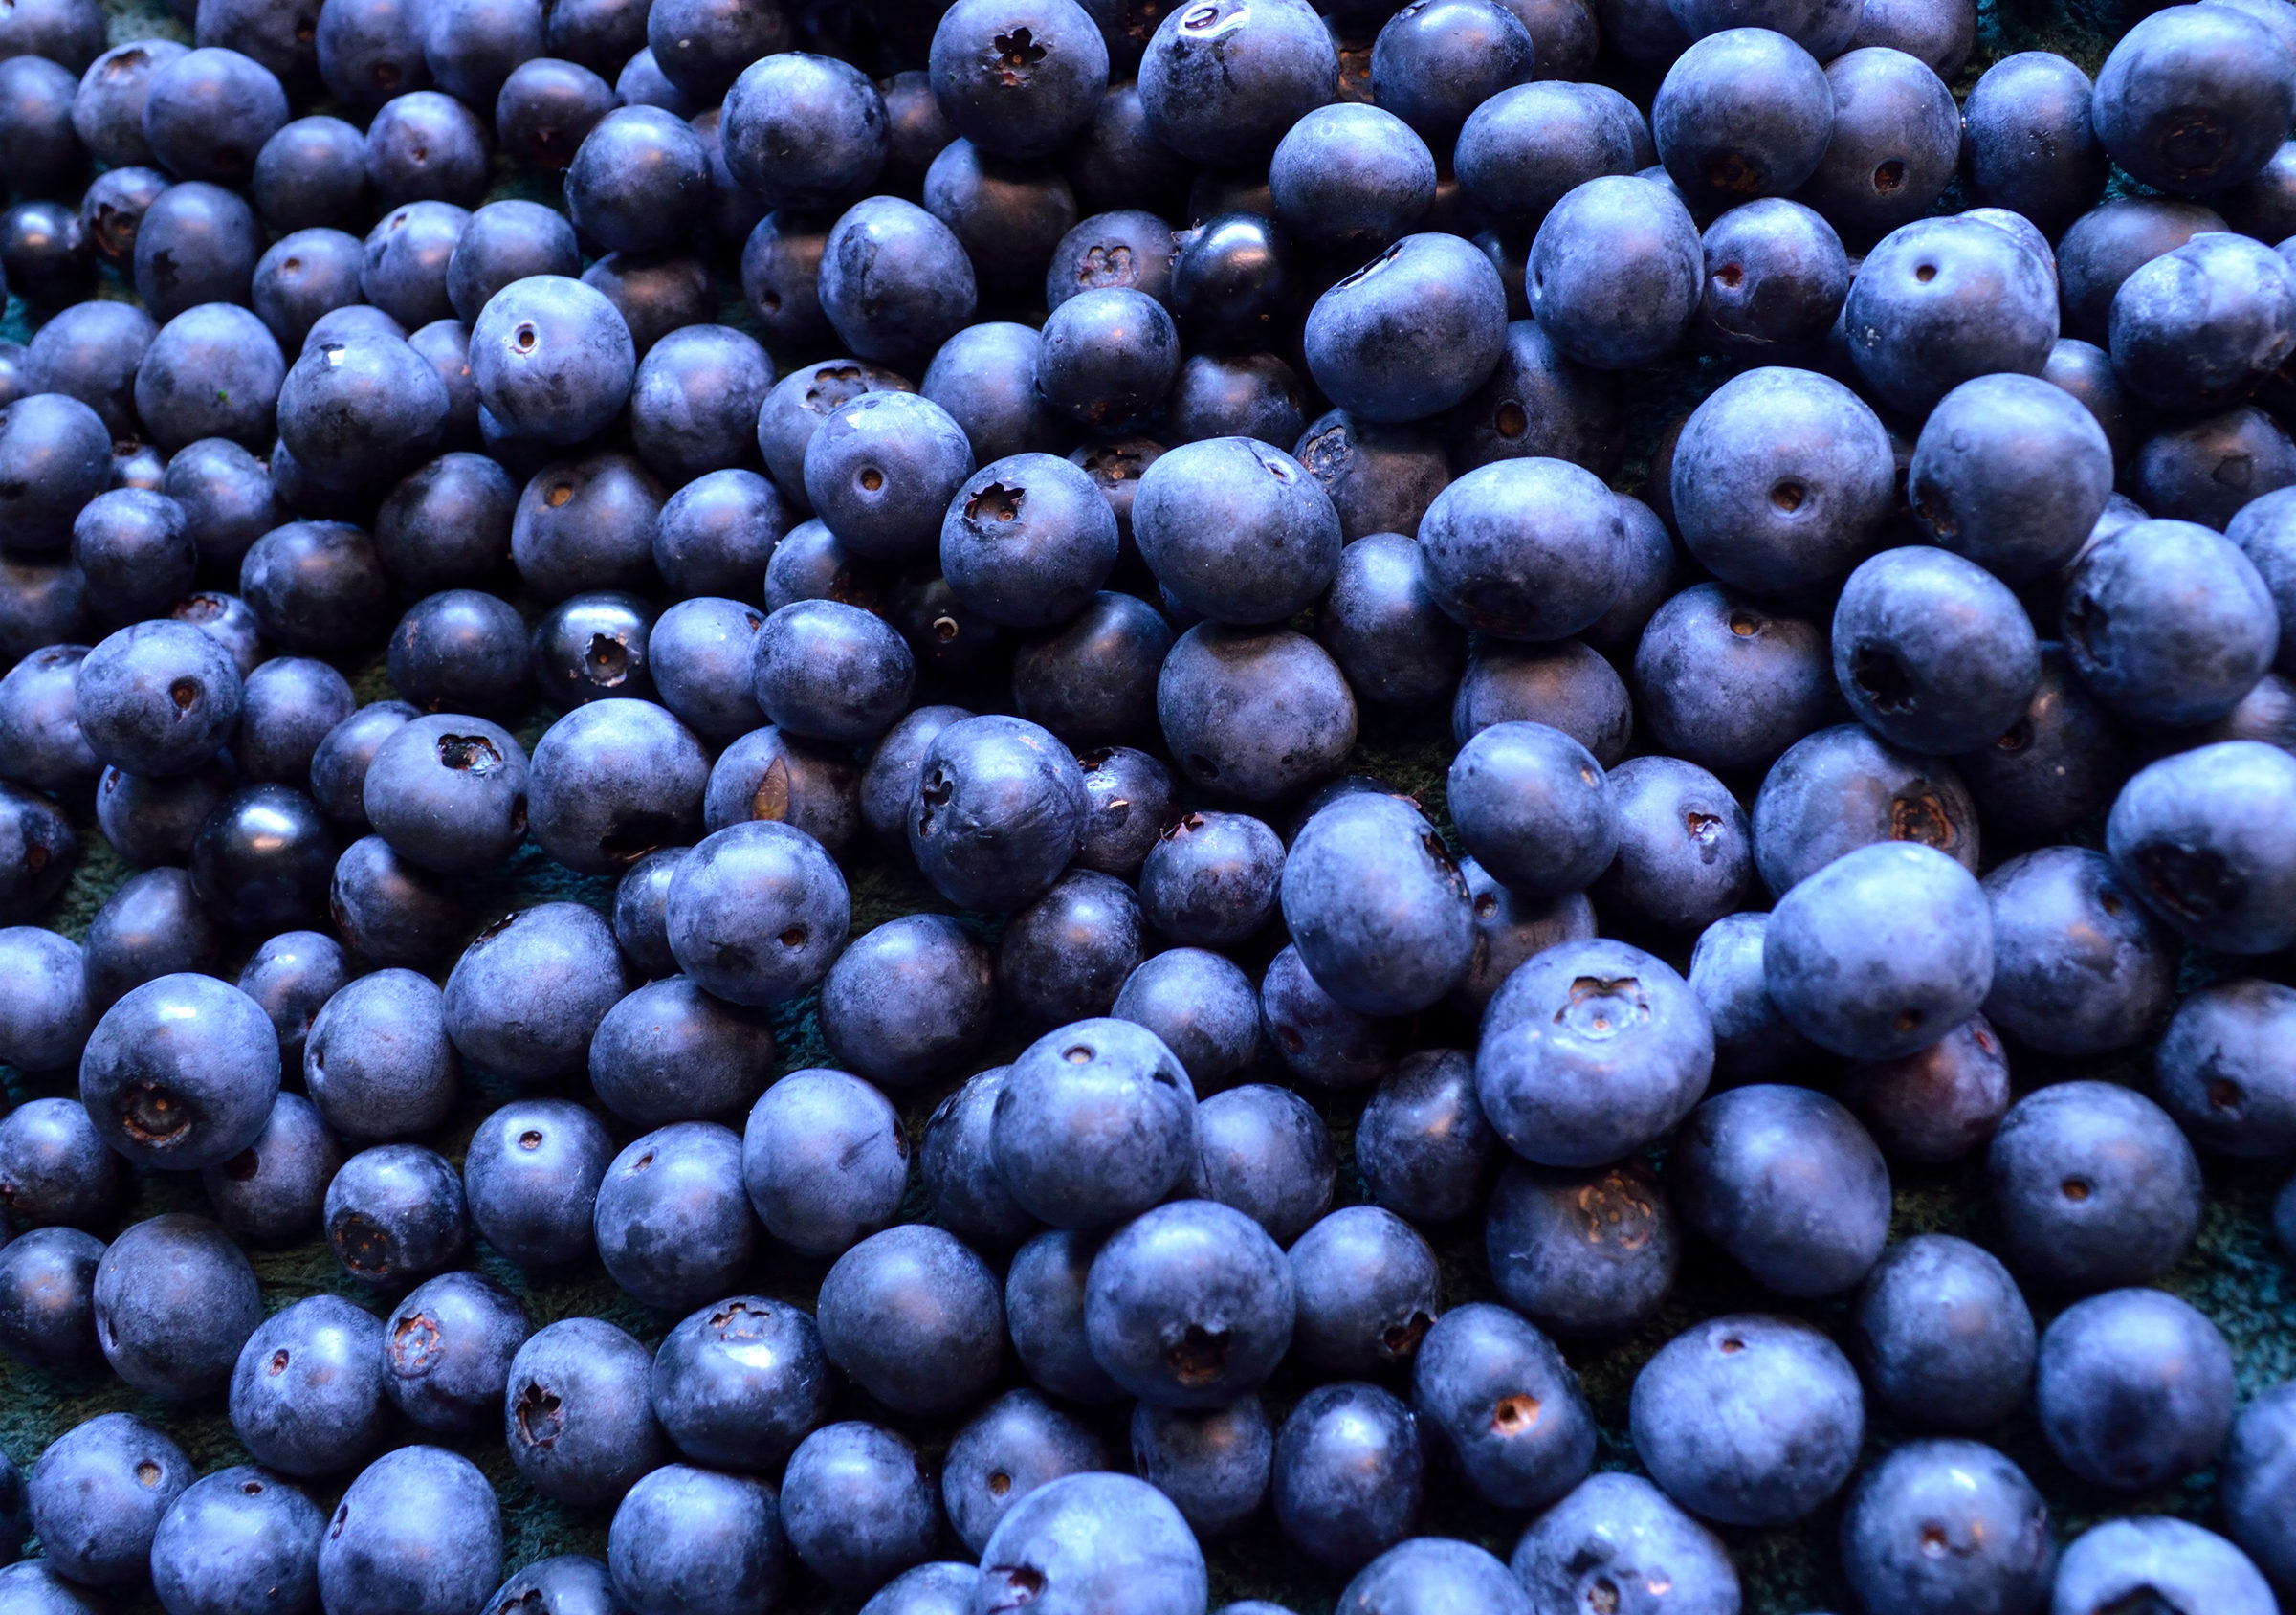 Fermented Blueberries May Restore Cognitive Function In Amnesia